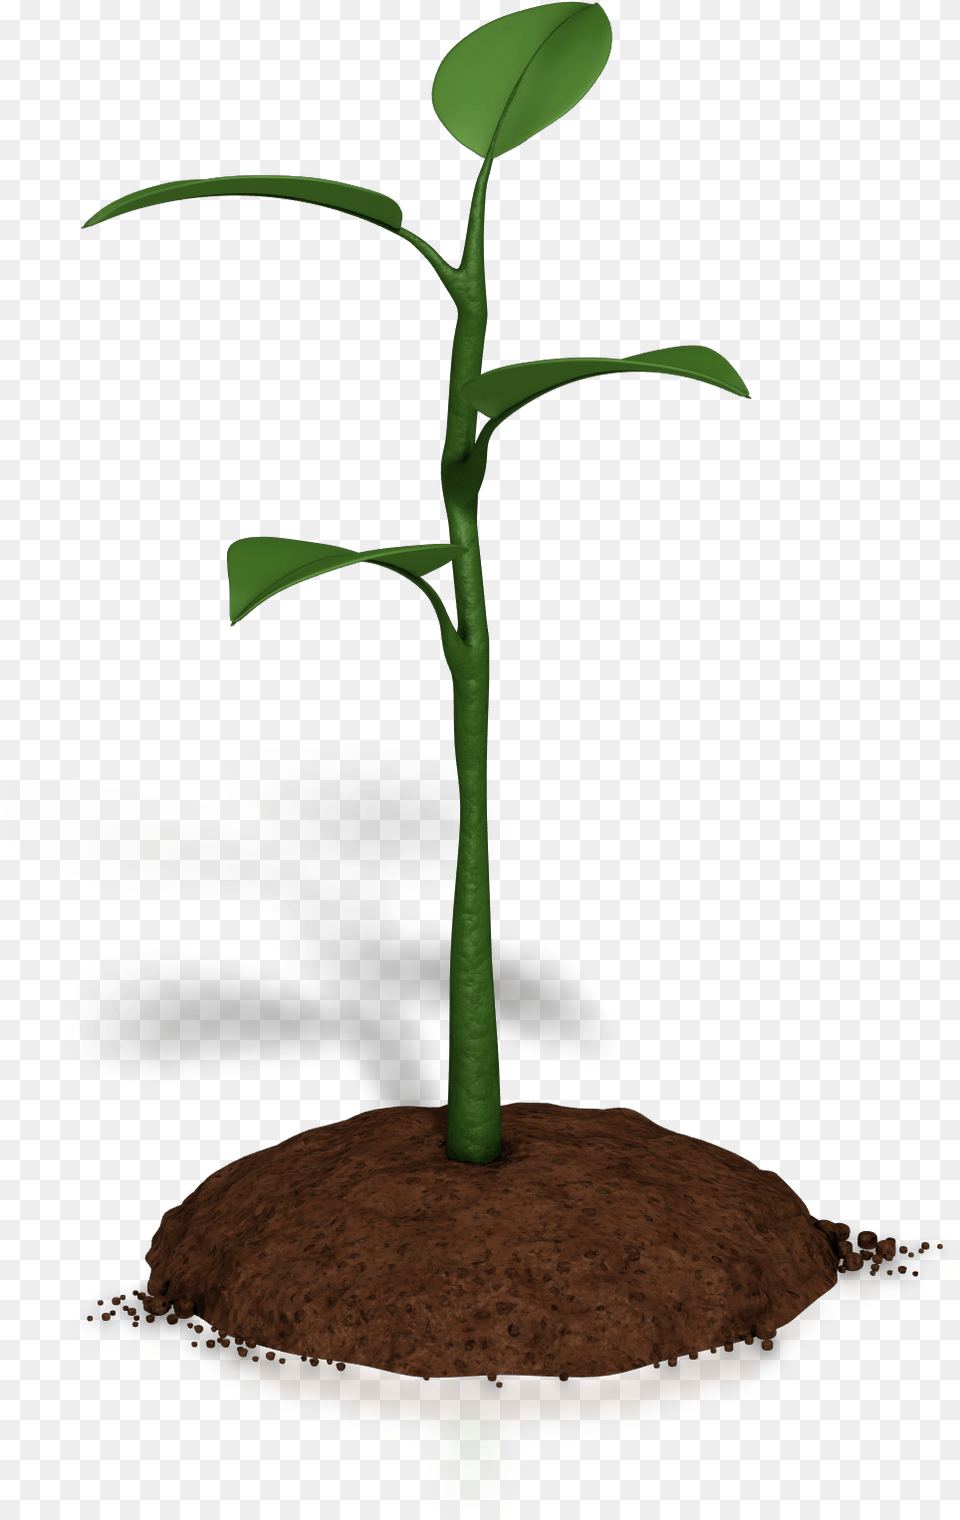 Soil Clipart Plant Growth Without Continual Growth And Progress Such Words, Leaf, Sprout, Tree Png